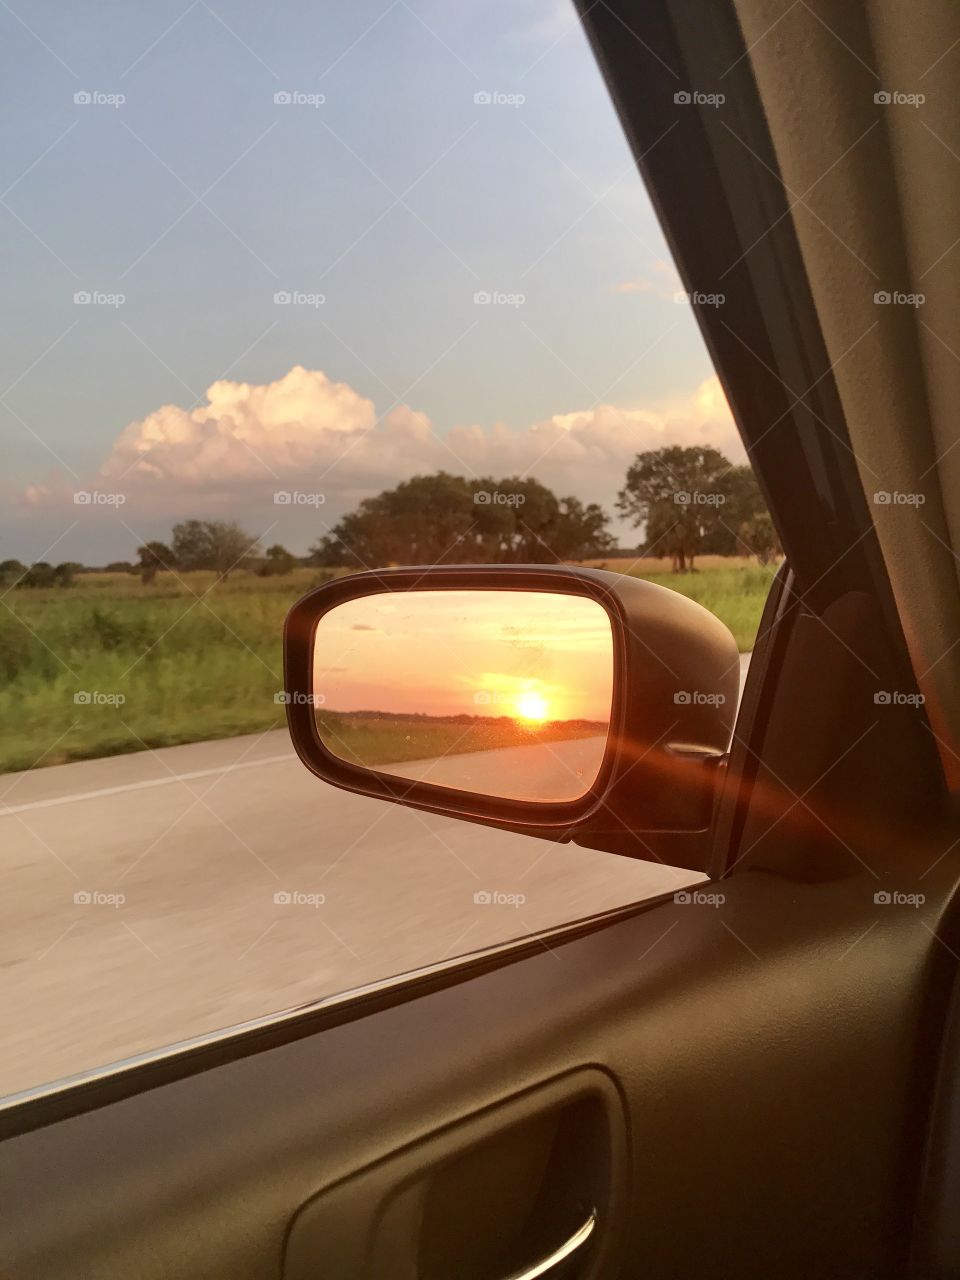 Sunset in rear view